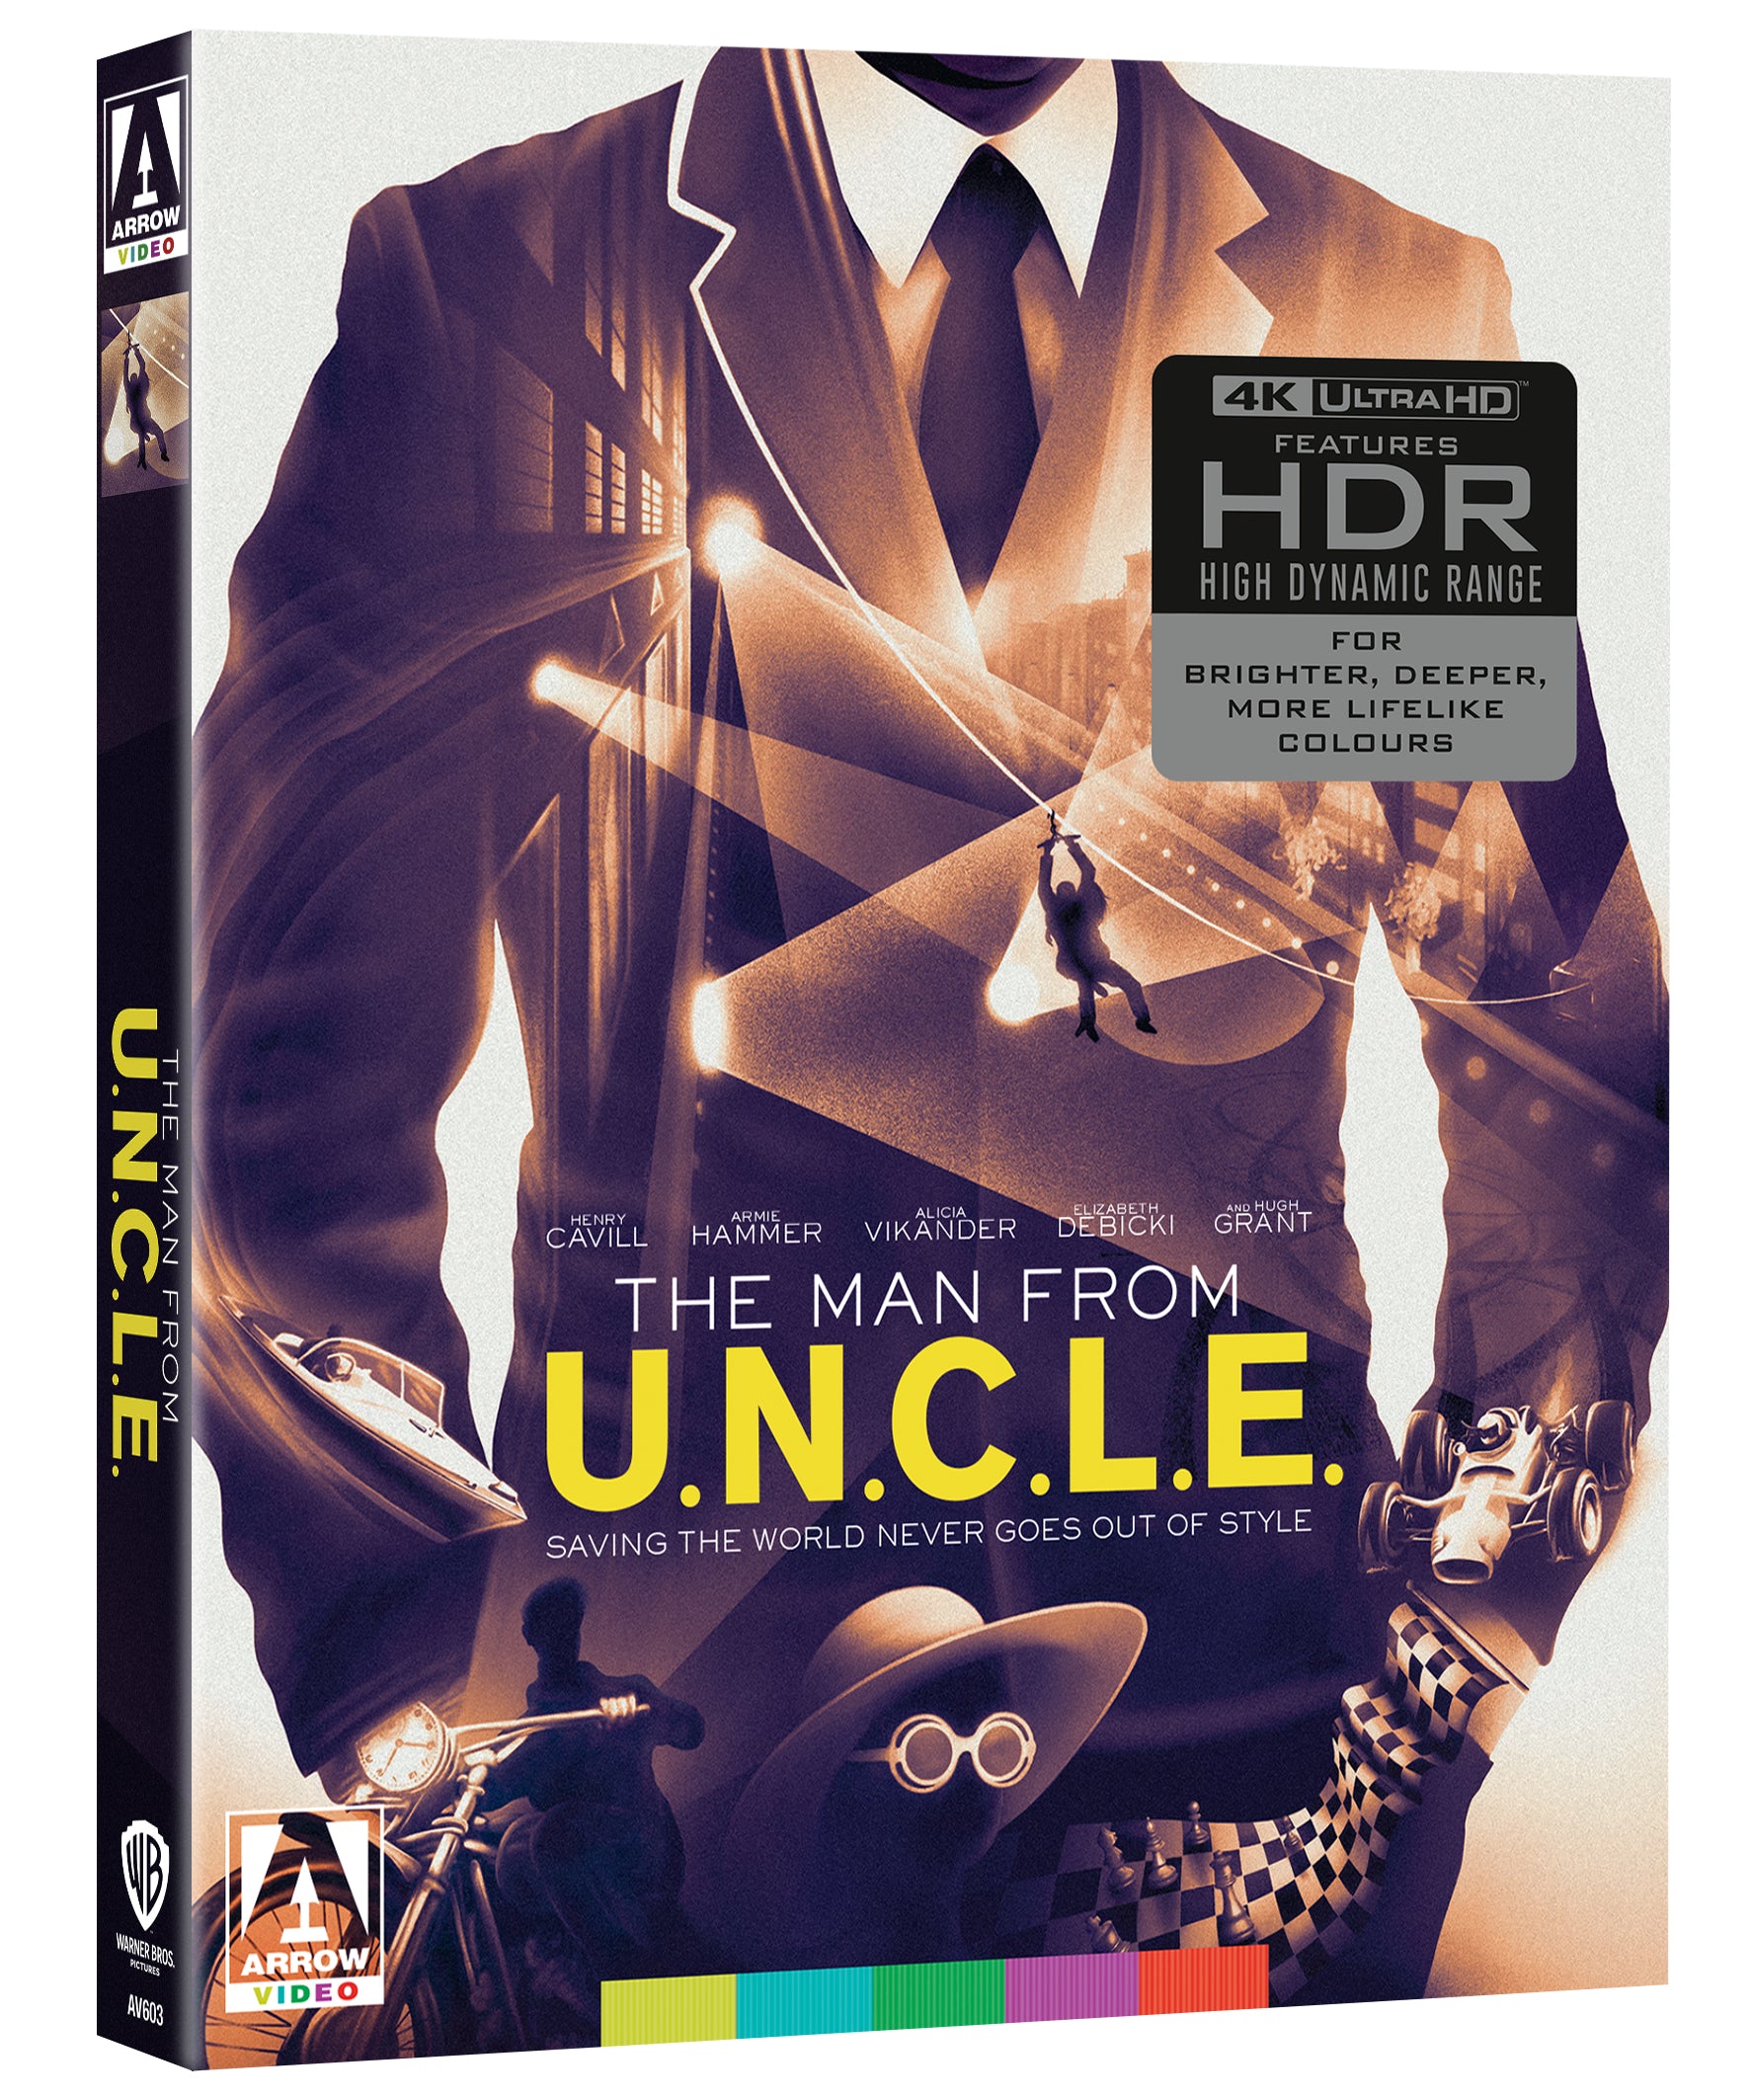 THE MAN FROM U.N.C.L.E. (LIMITED EDITION) 4K UHD [PRE-ORDER]